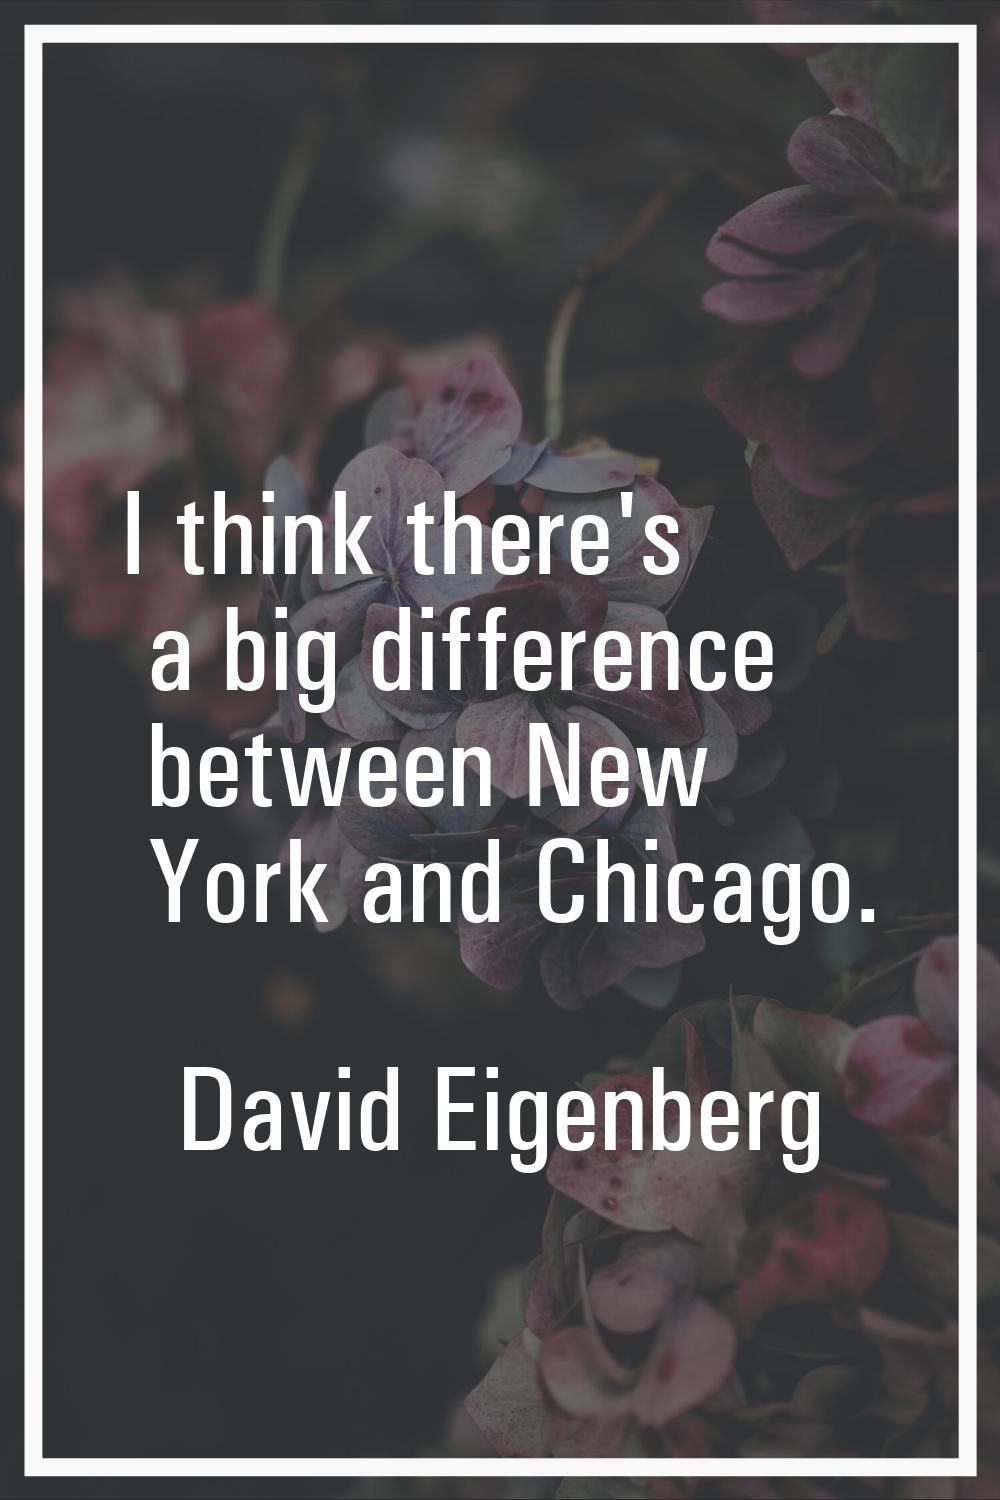 I think there's a big difference between New York and Chicago.